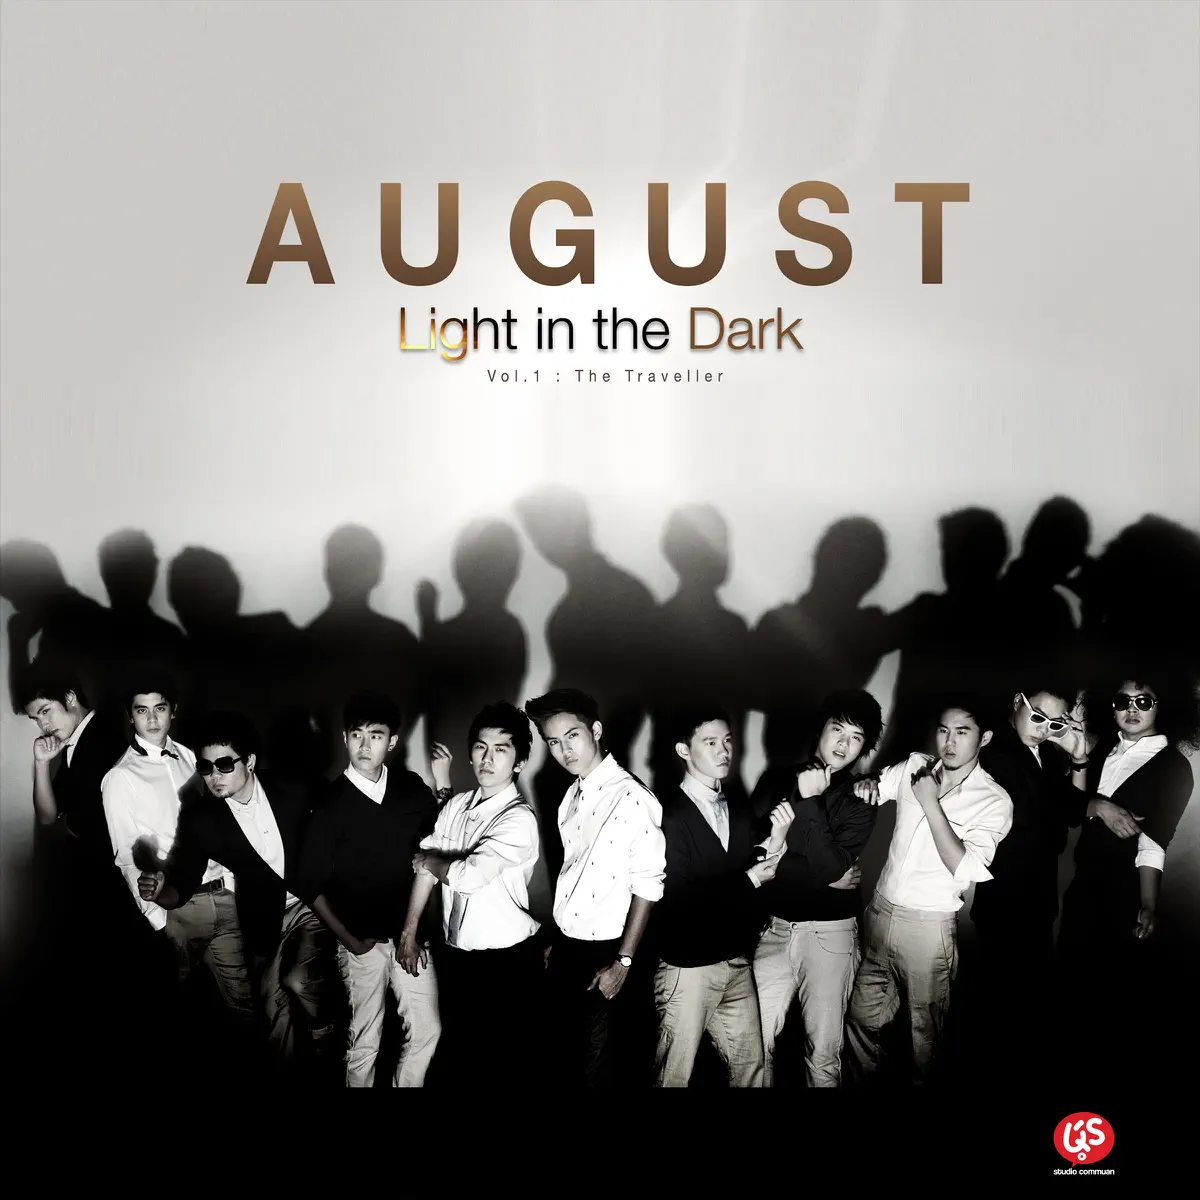 August Band - Light in the Dark, Vol. 1: The Traveller (2014) [iTunes Plus AAC M4A]-新房子